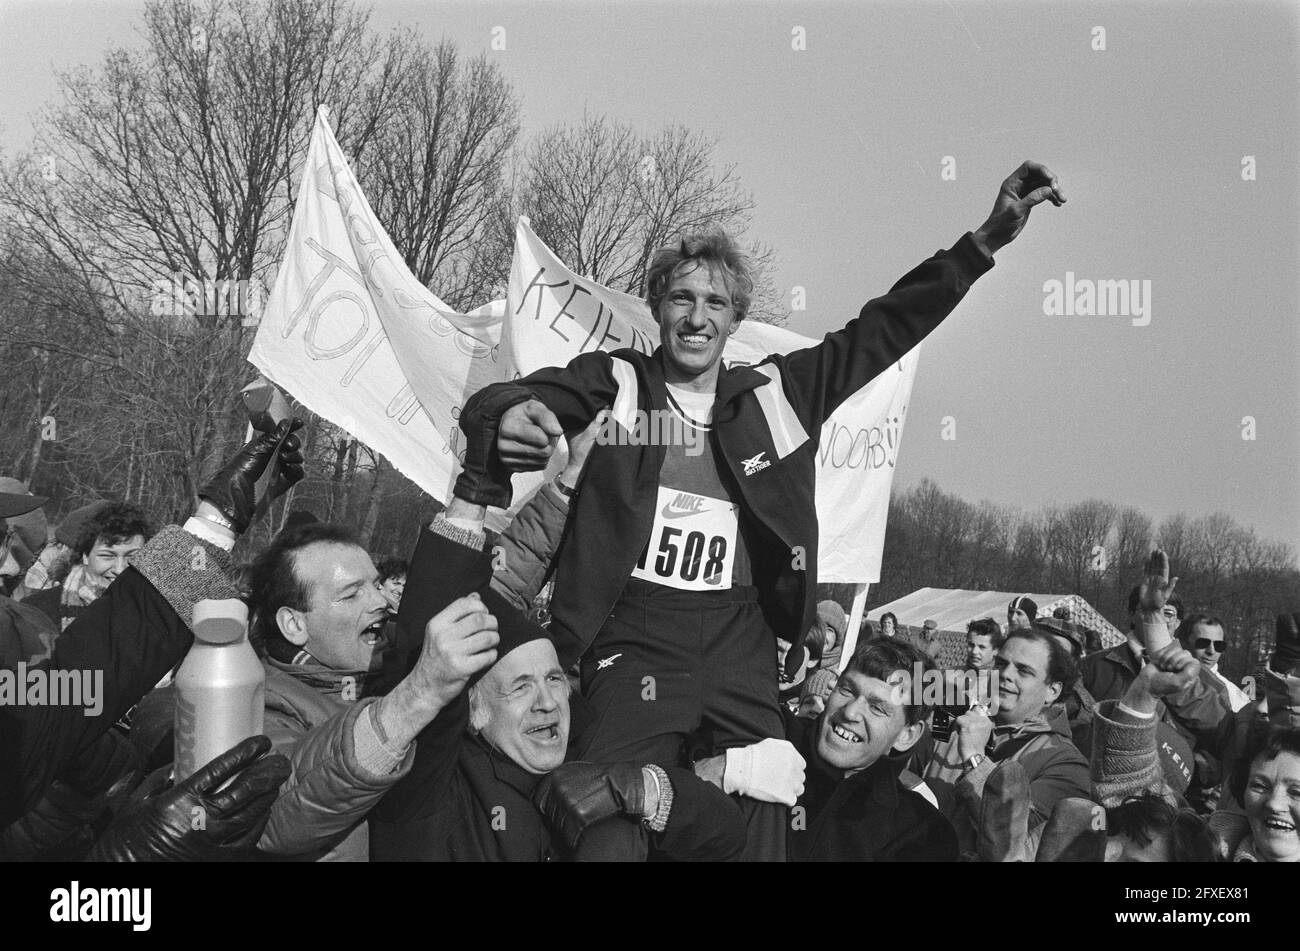 Tonnie Dirks at fans on shoulders, March 2, 1986, banners, supporters, field trips, The Netherlands, 20th century press agency photo, news to remember, documentary, historic photography 1945-1990, visual stories, human history of the Twentieth Century, capturing moments in time Stock Photo